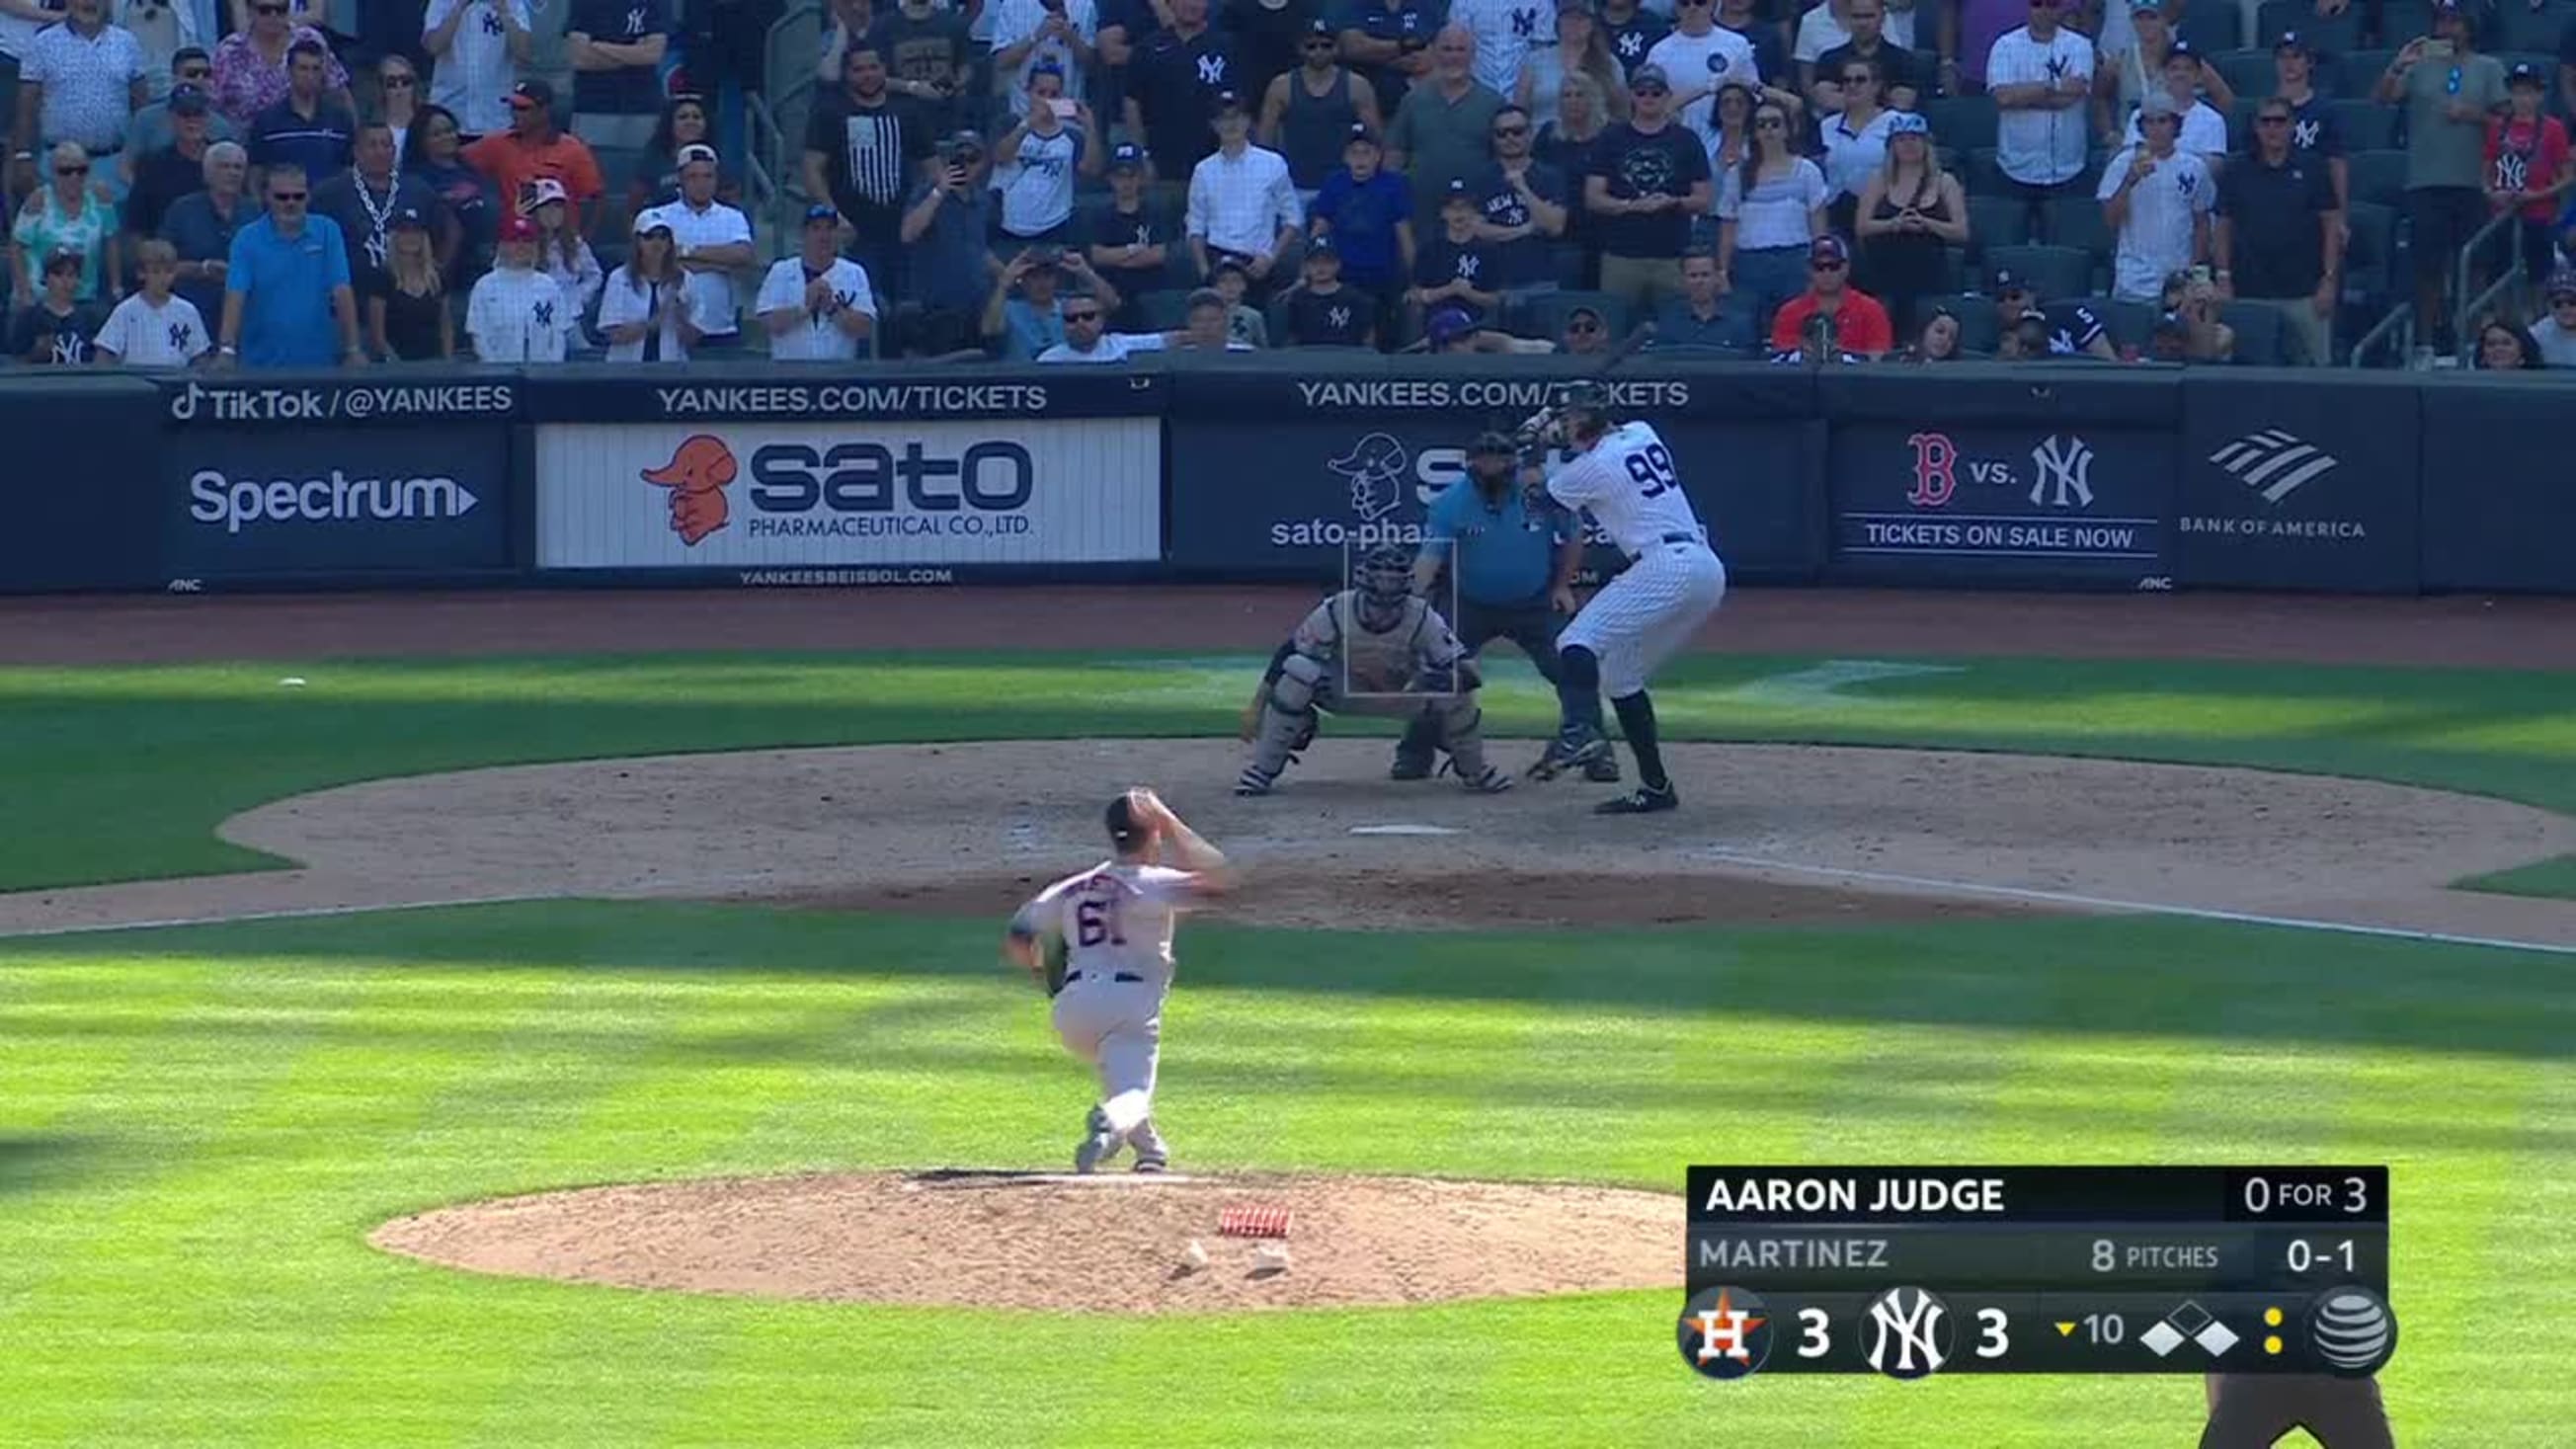 The Aaron Judge intentional walk-fest has shed new light on this